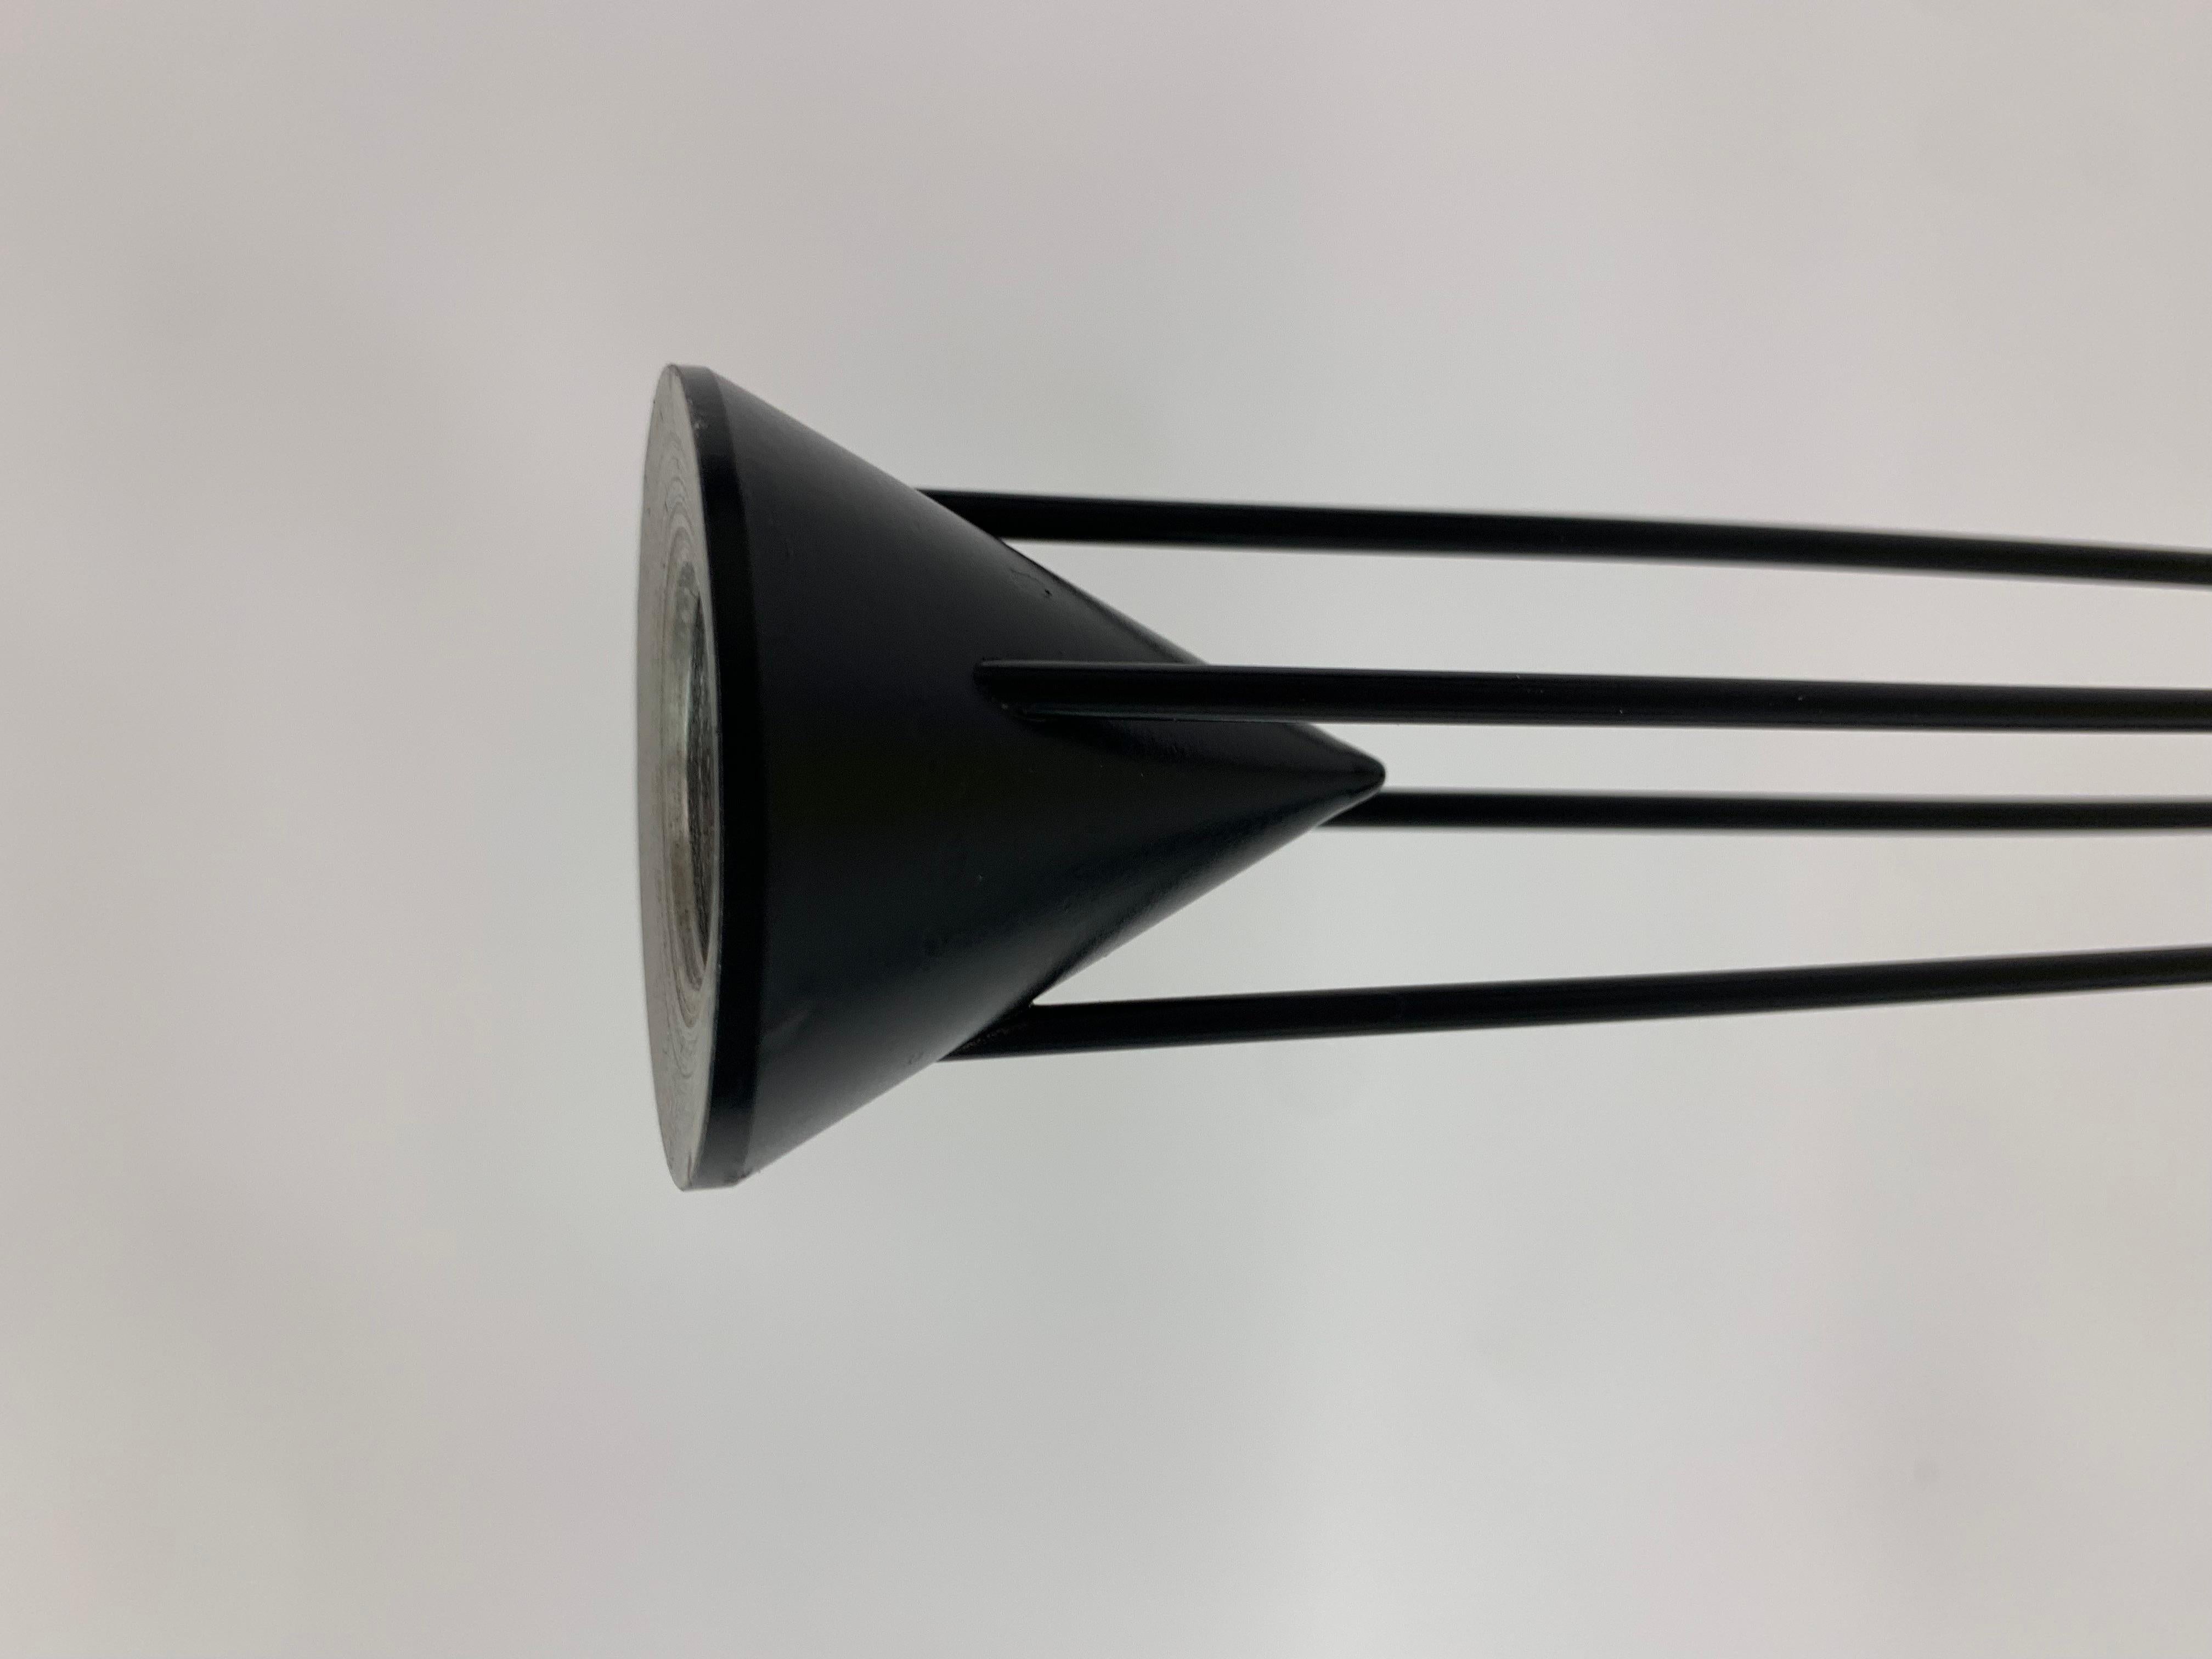 Set of 3 Post-Modern Memphis Candle Sticks by Markus Borgens, 1980s For Sale 8